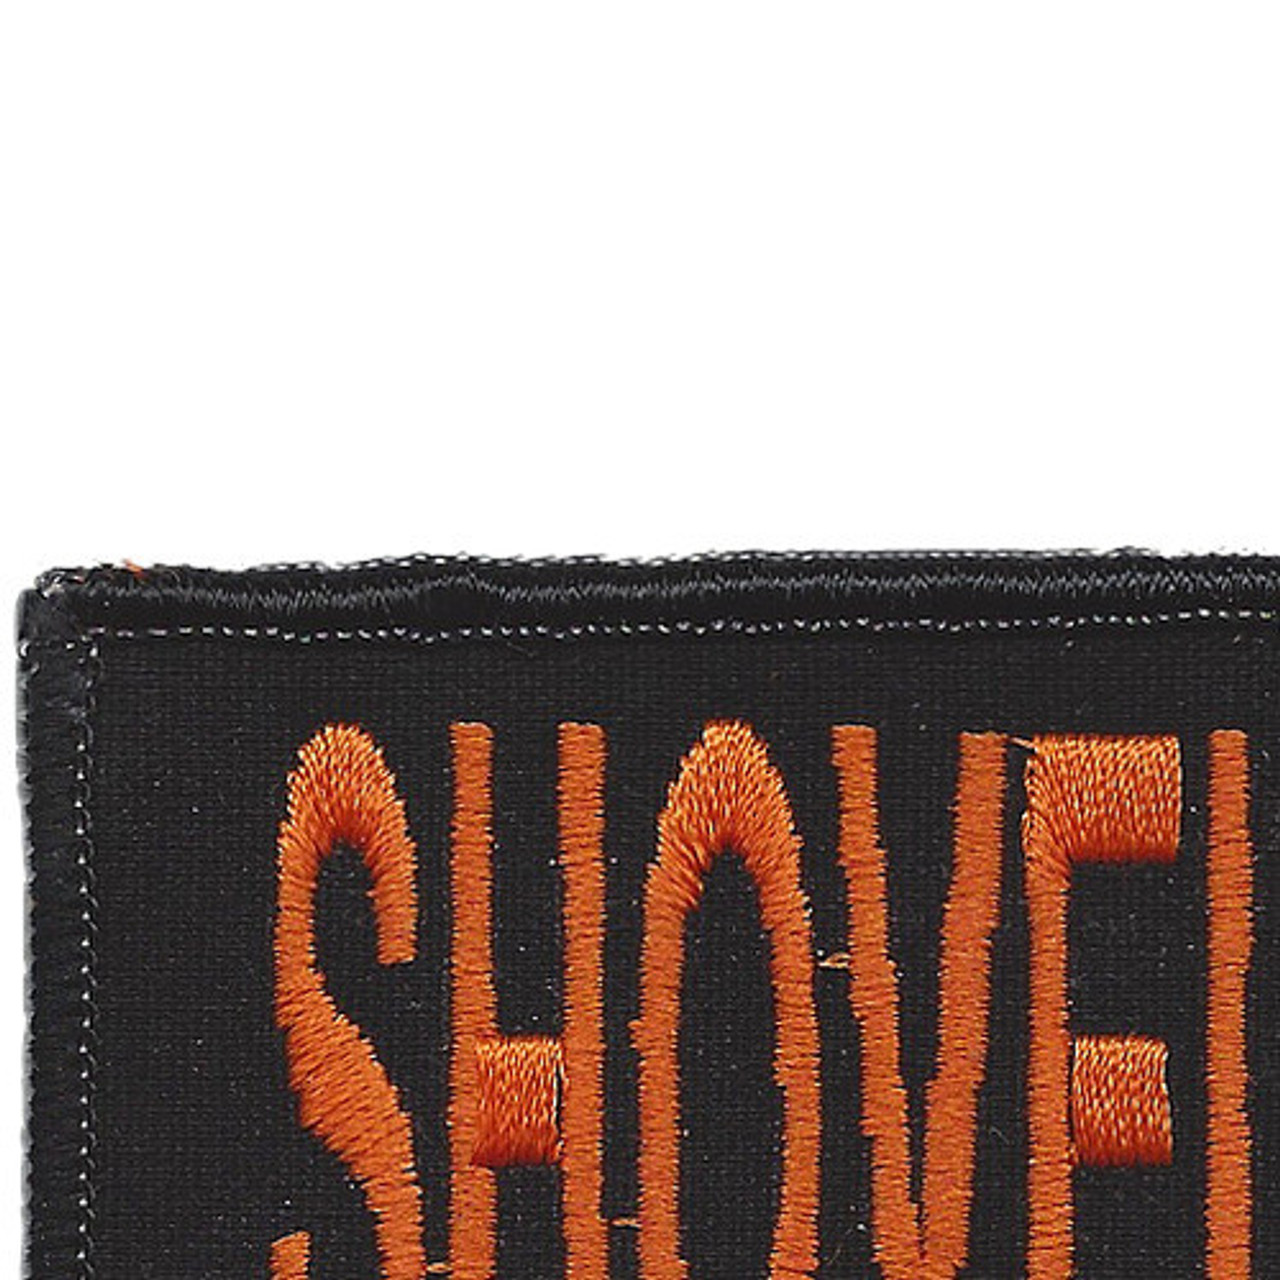 SHOVELHEAD FOREVER Rockers Biker Motorcycle Patch by DIXIEFARMER in Old English